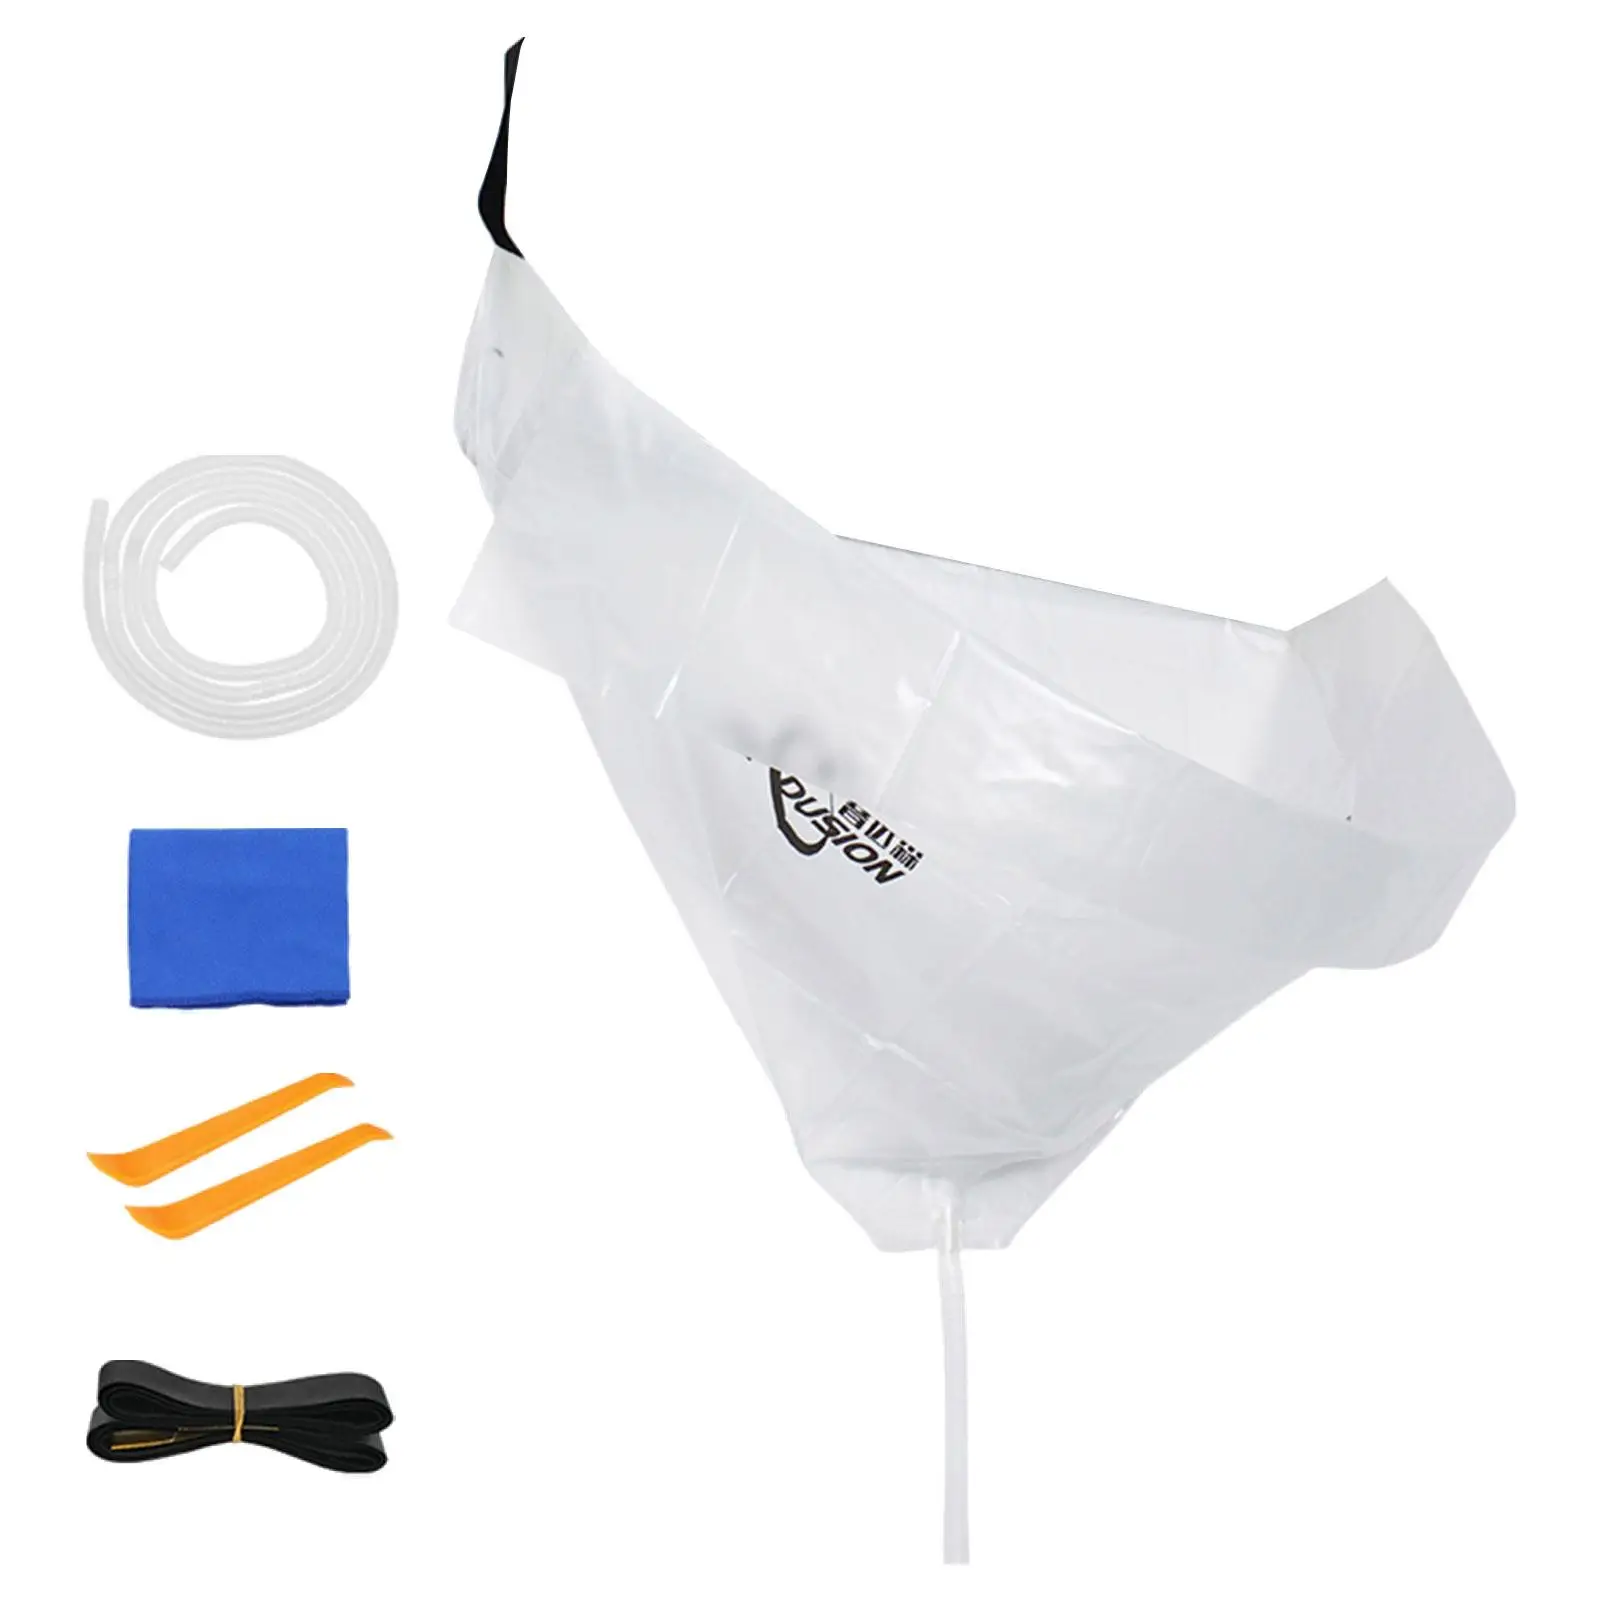 Air Conditioning Cleaning Cover Drain Outlet Dust Washing clean bag Conditioning Service Bag for Household Office Home